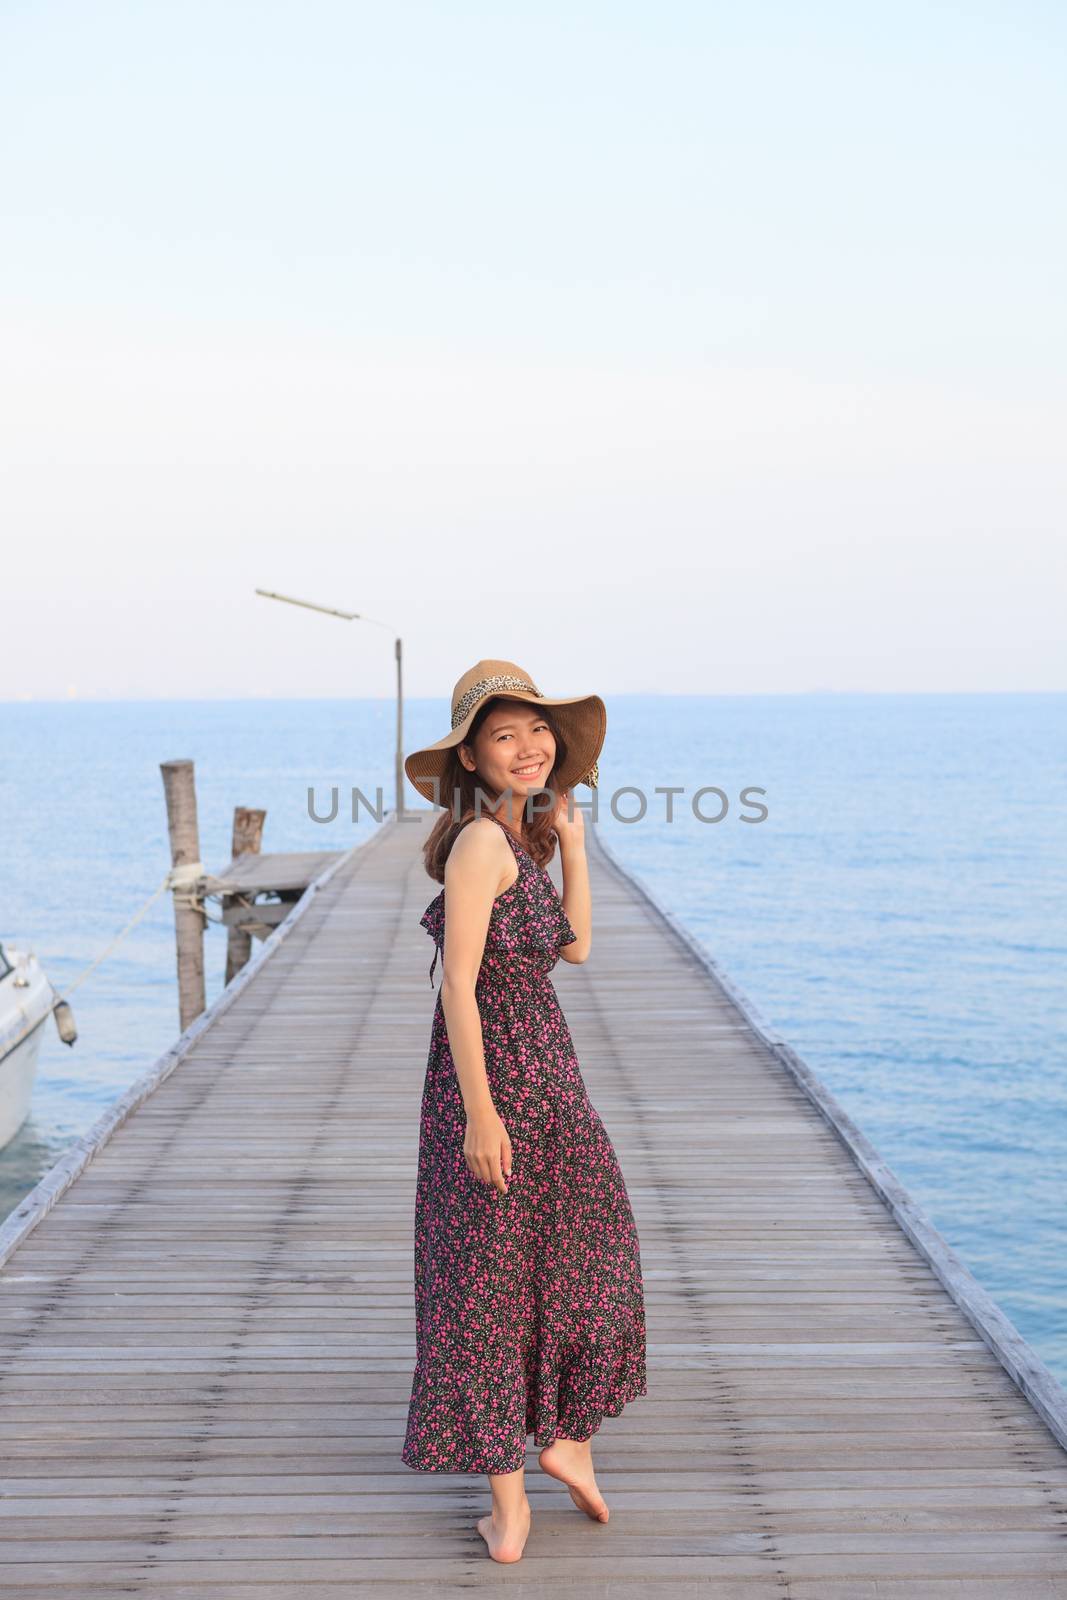 portrait beautiful woman wearing wide straw hat and long dress walking on wood bridge piers use for people relaxing and activities on holiday vacation 